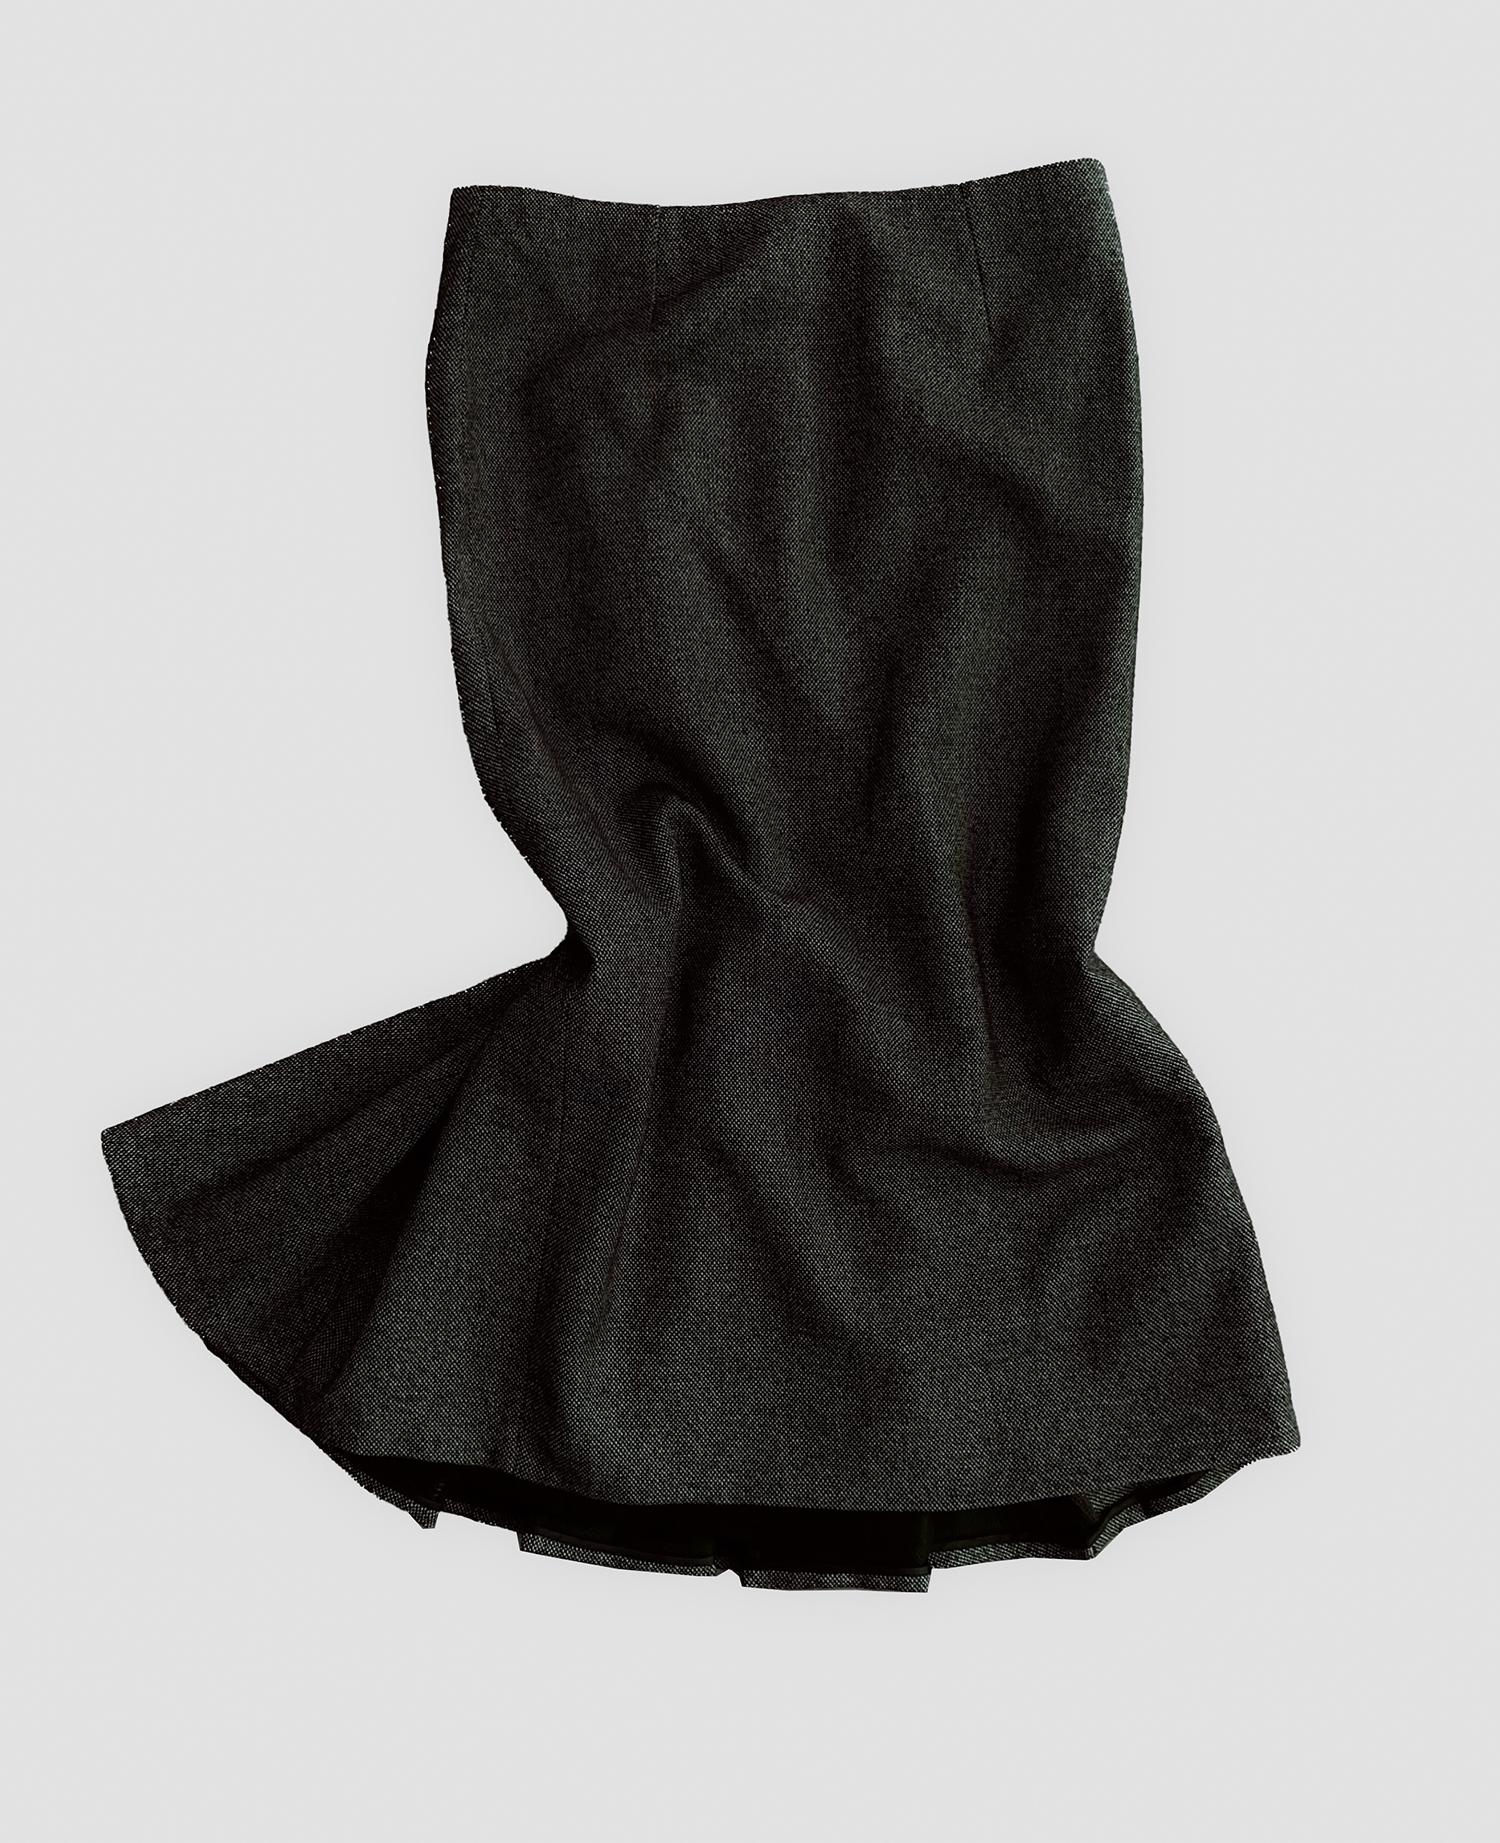 Alexander McQueen Archival FW 2005 'The Man Who Knew Too Much' Wool Skirt Suit For Sale 9